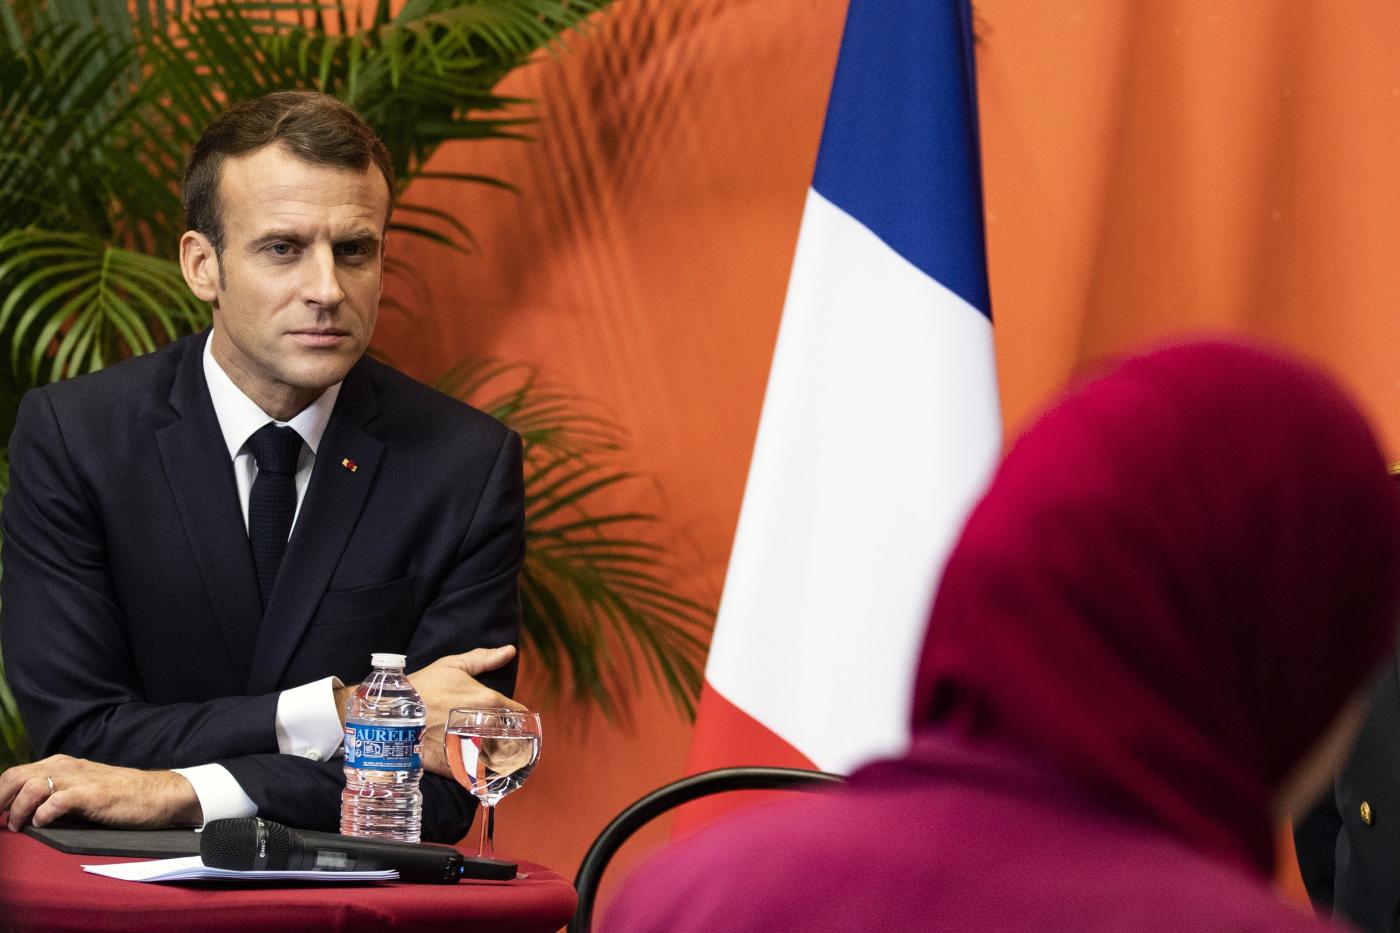 From Colonialism to Laicite: France Continues to Wage War on Muslim Women